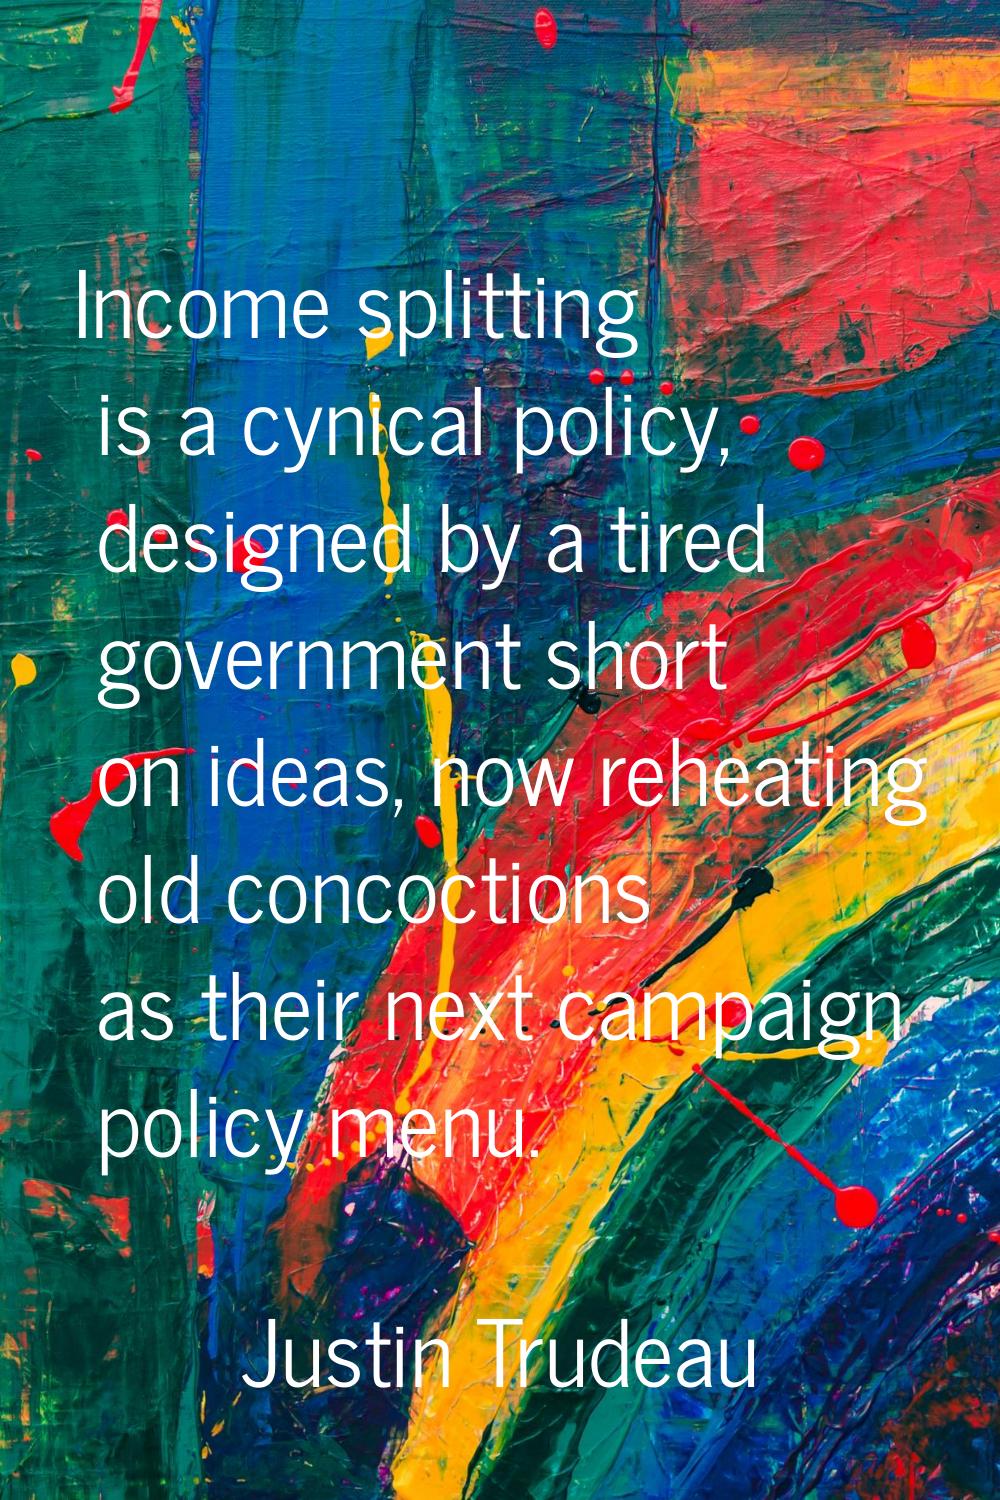 Income splitting is a cynical policy, designed by a tired government short on ideas, now reheating 